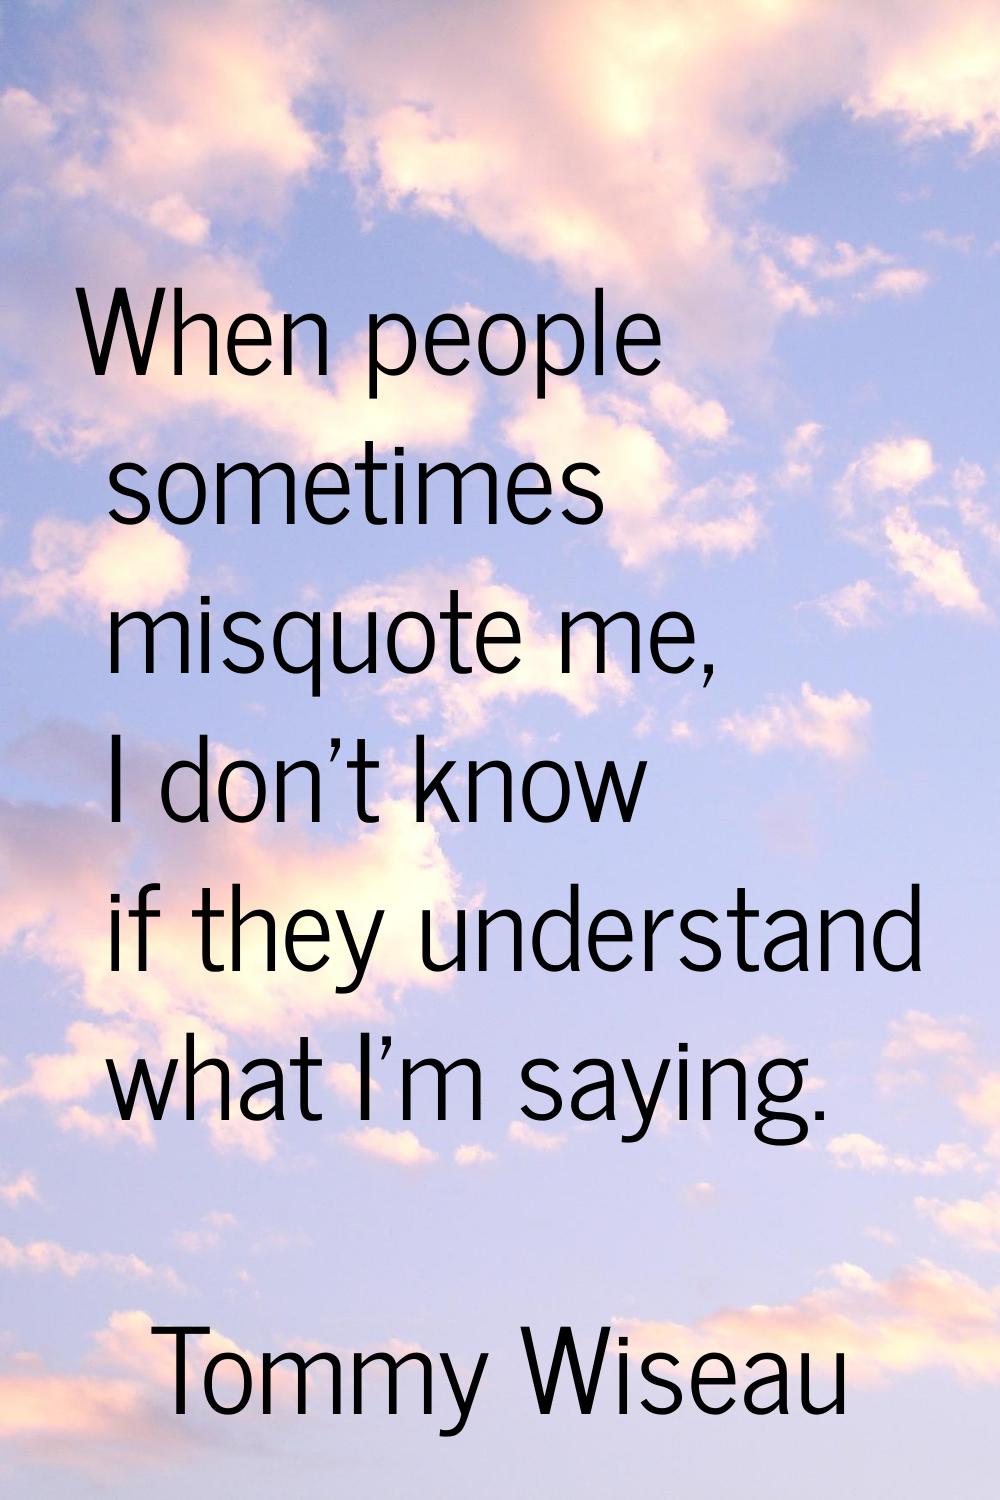 When people sometimes misquote me, I don't know if they understand what I'm saying.